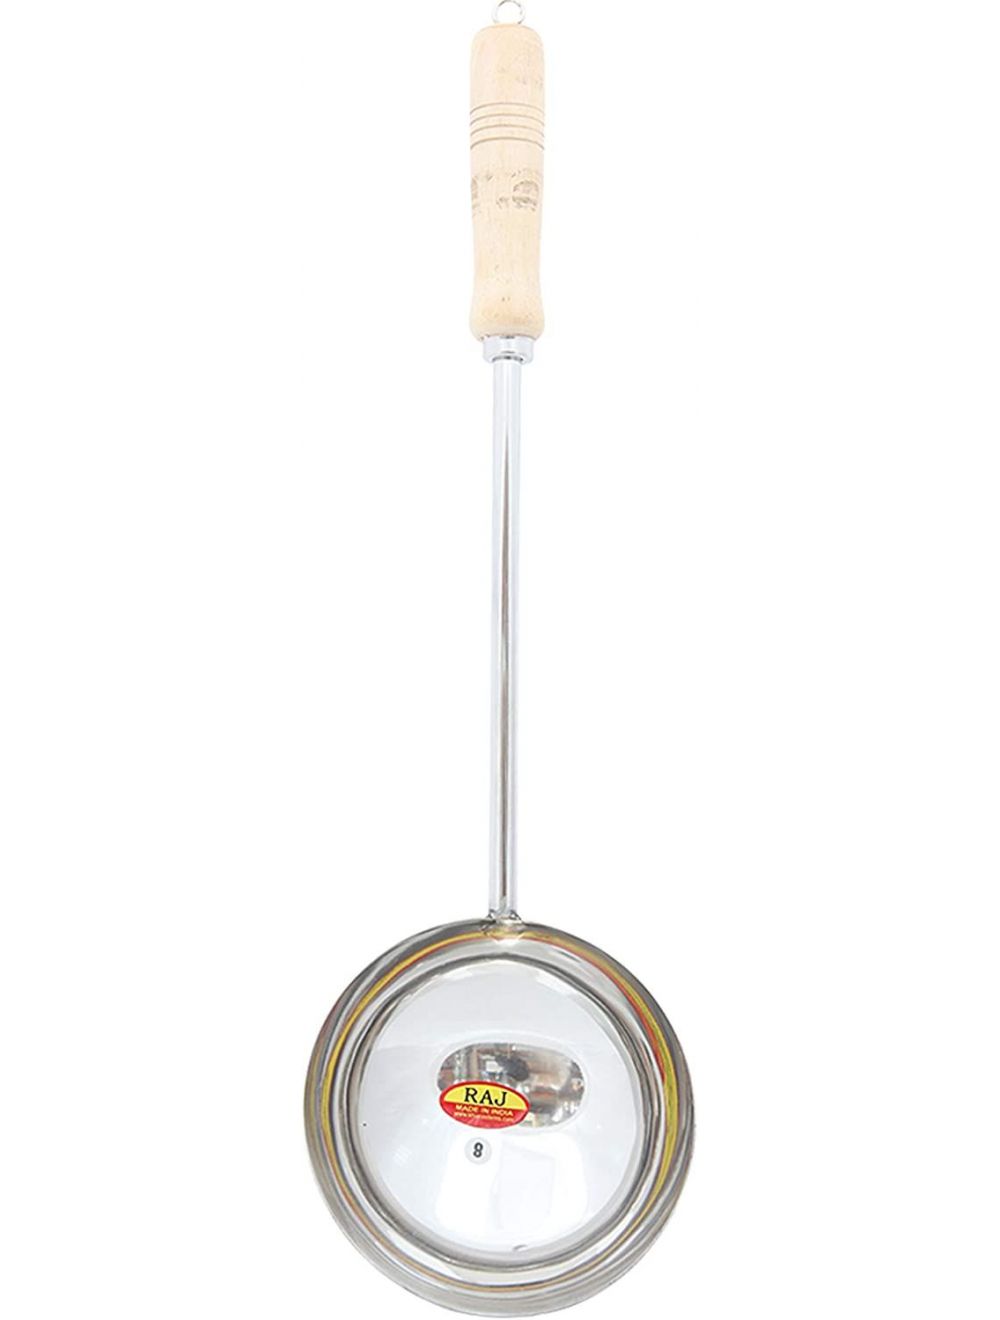 RAJ Steel Ladle with Wooden Handle, Silver, 46 cm, RUL004